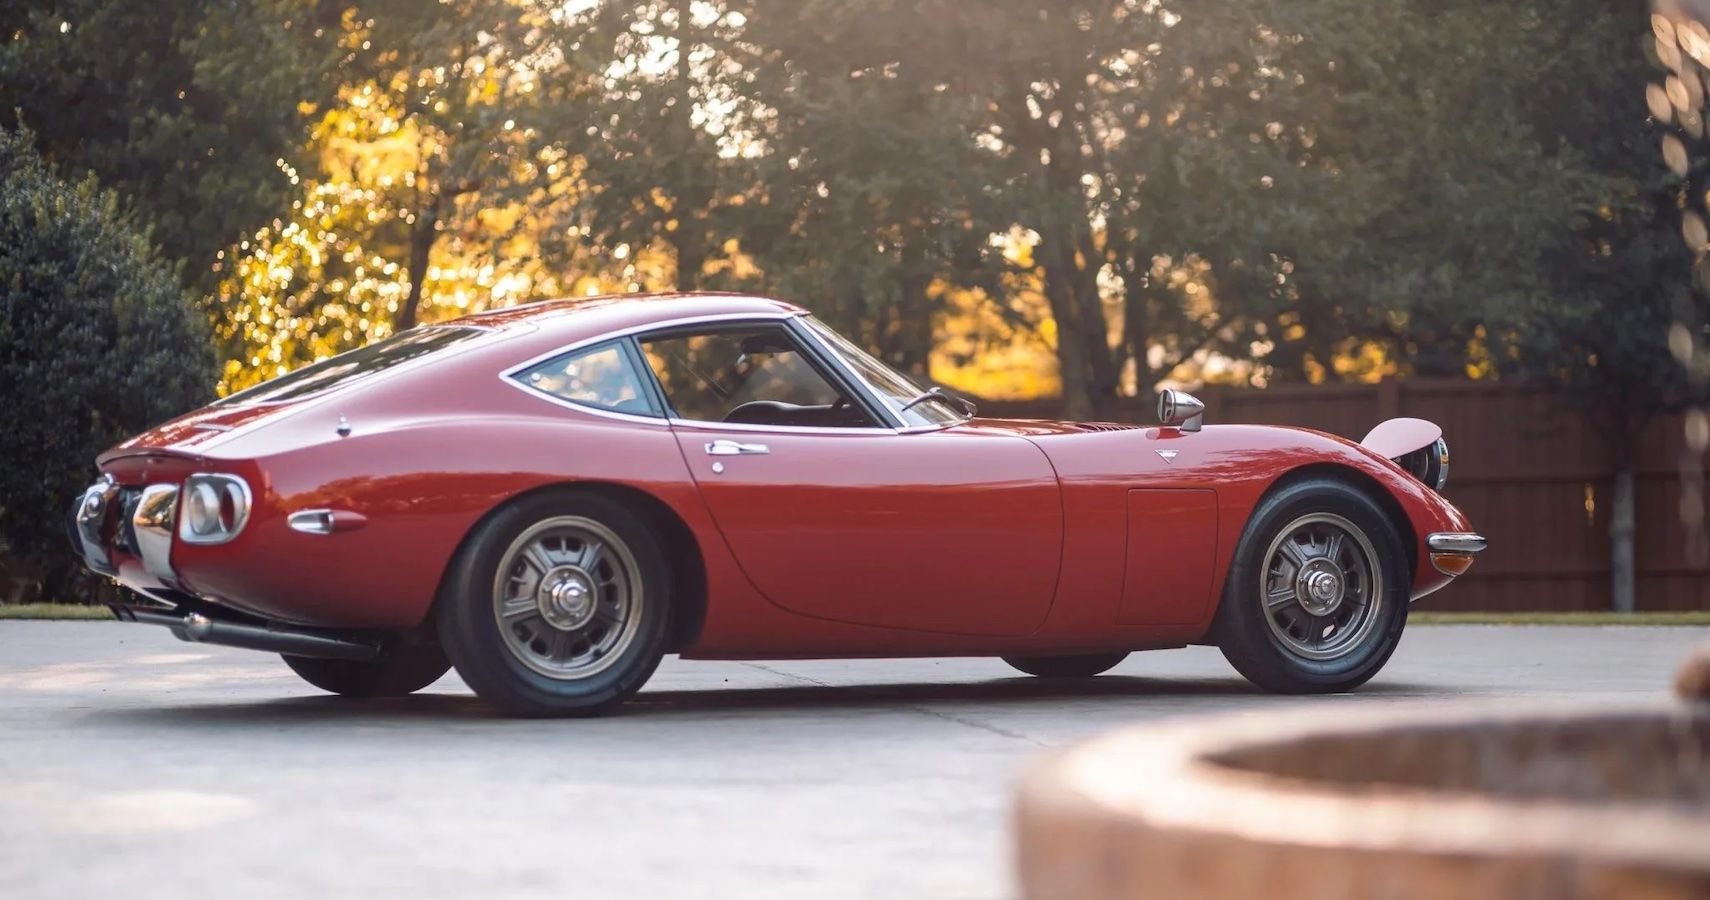 Red 1967 Toyota 2000GT sports car